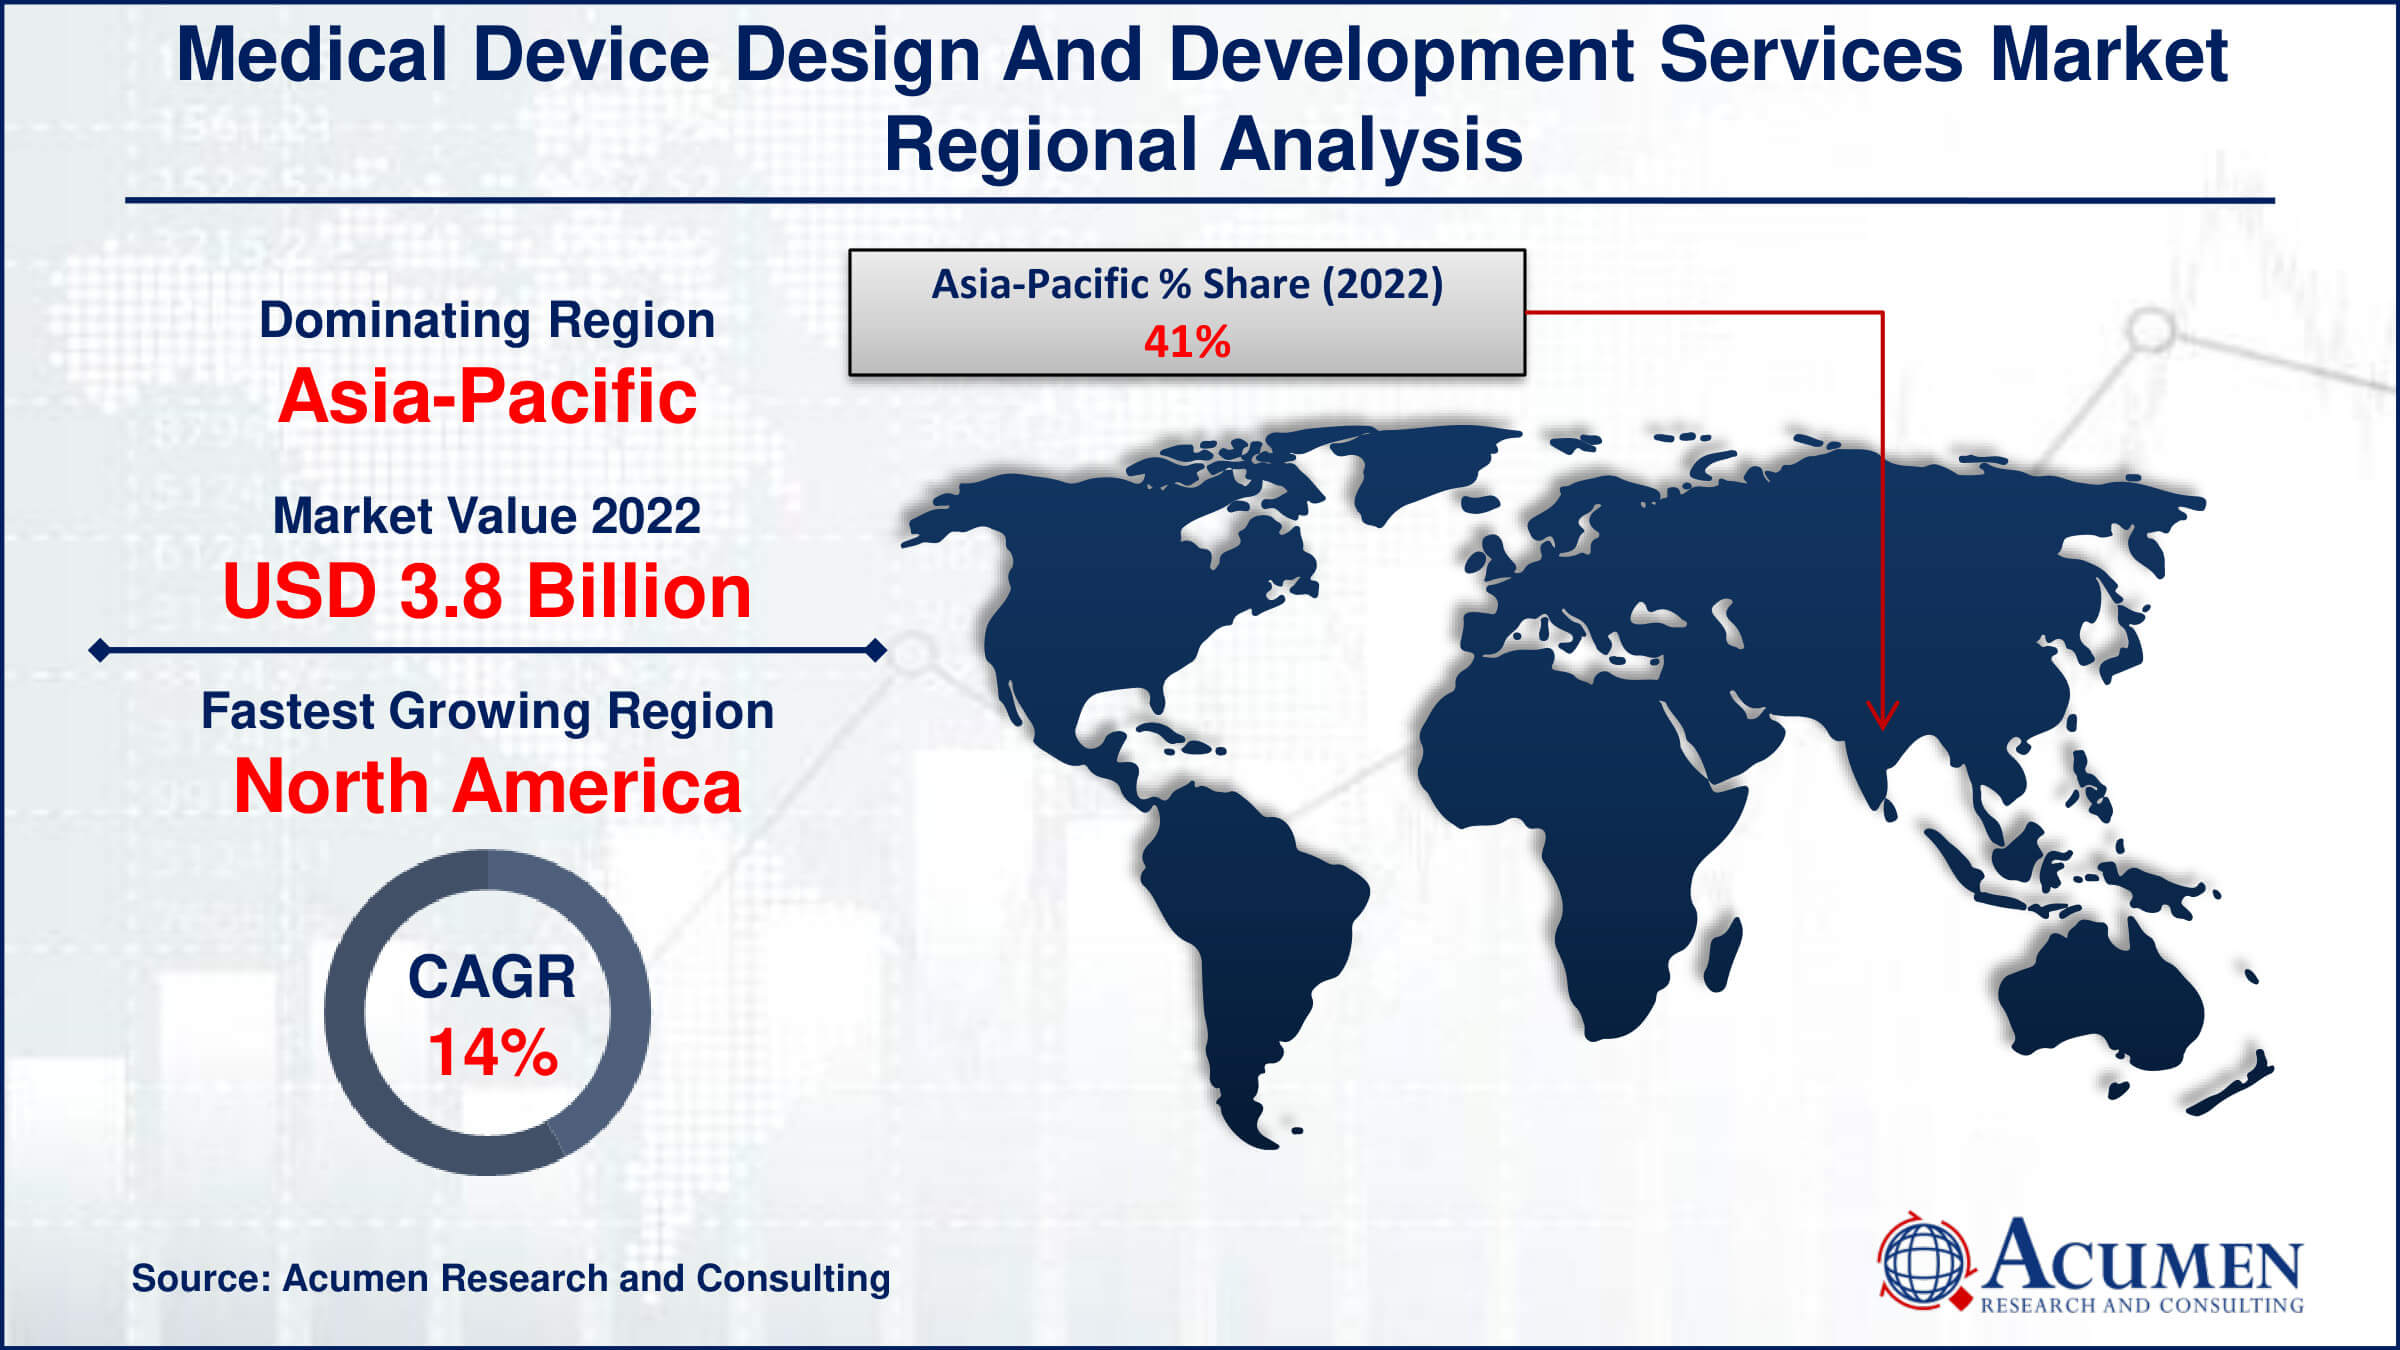 Medical Device Design and Development Services Market Drivers